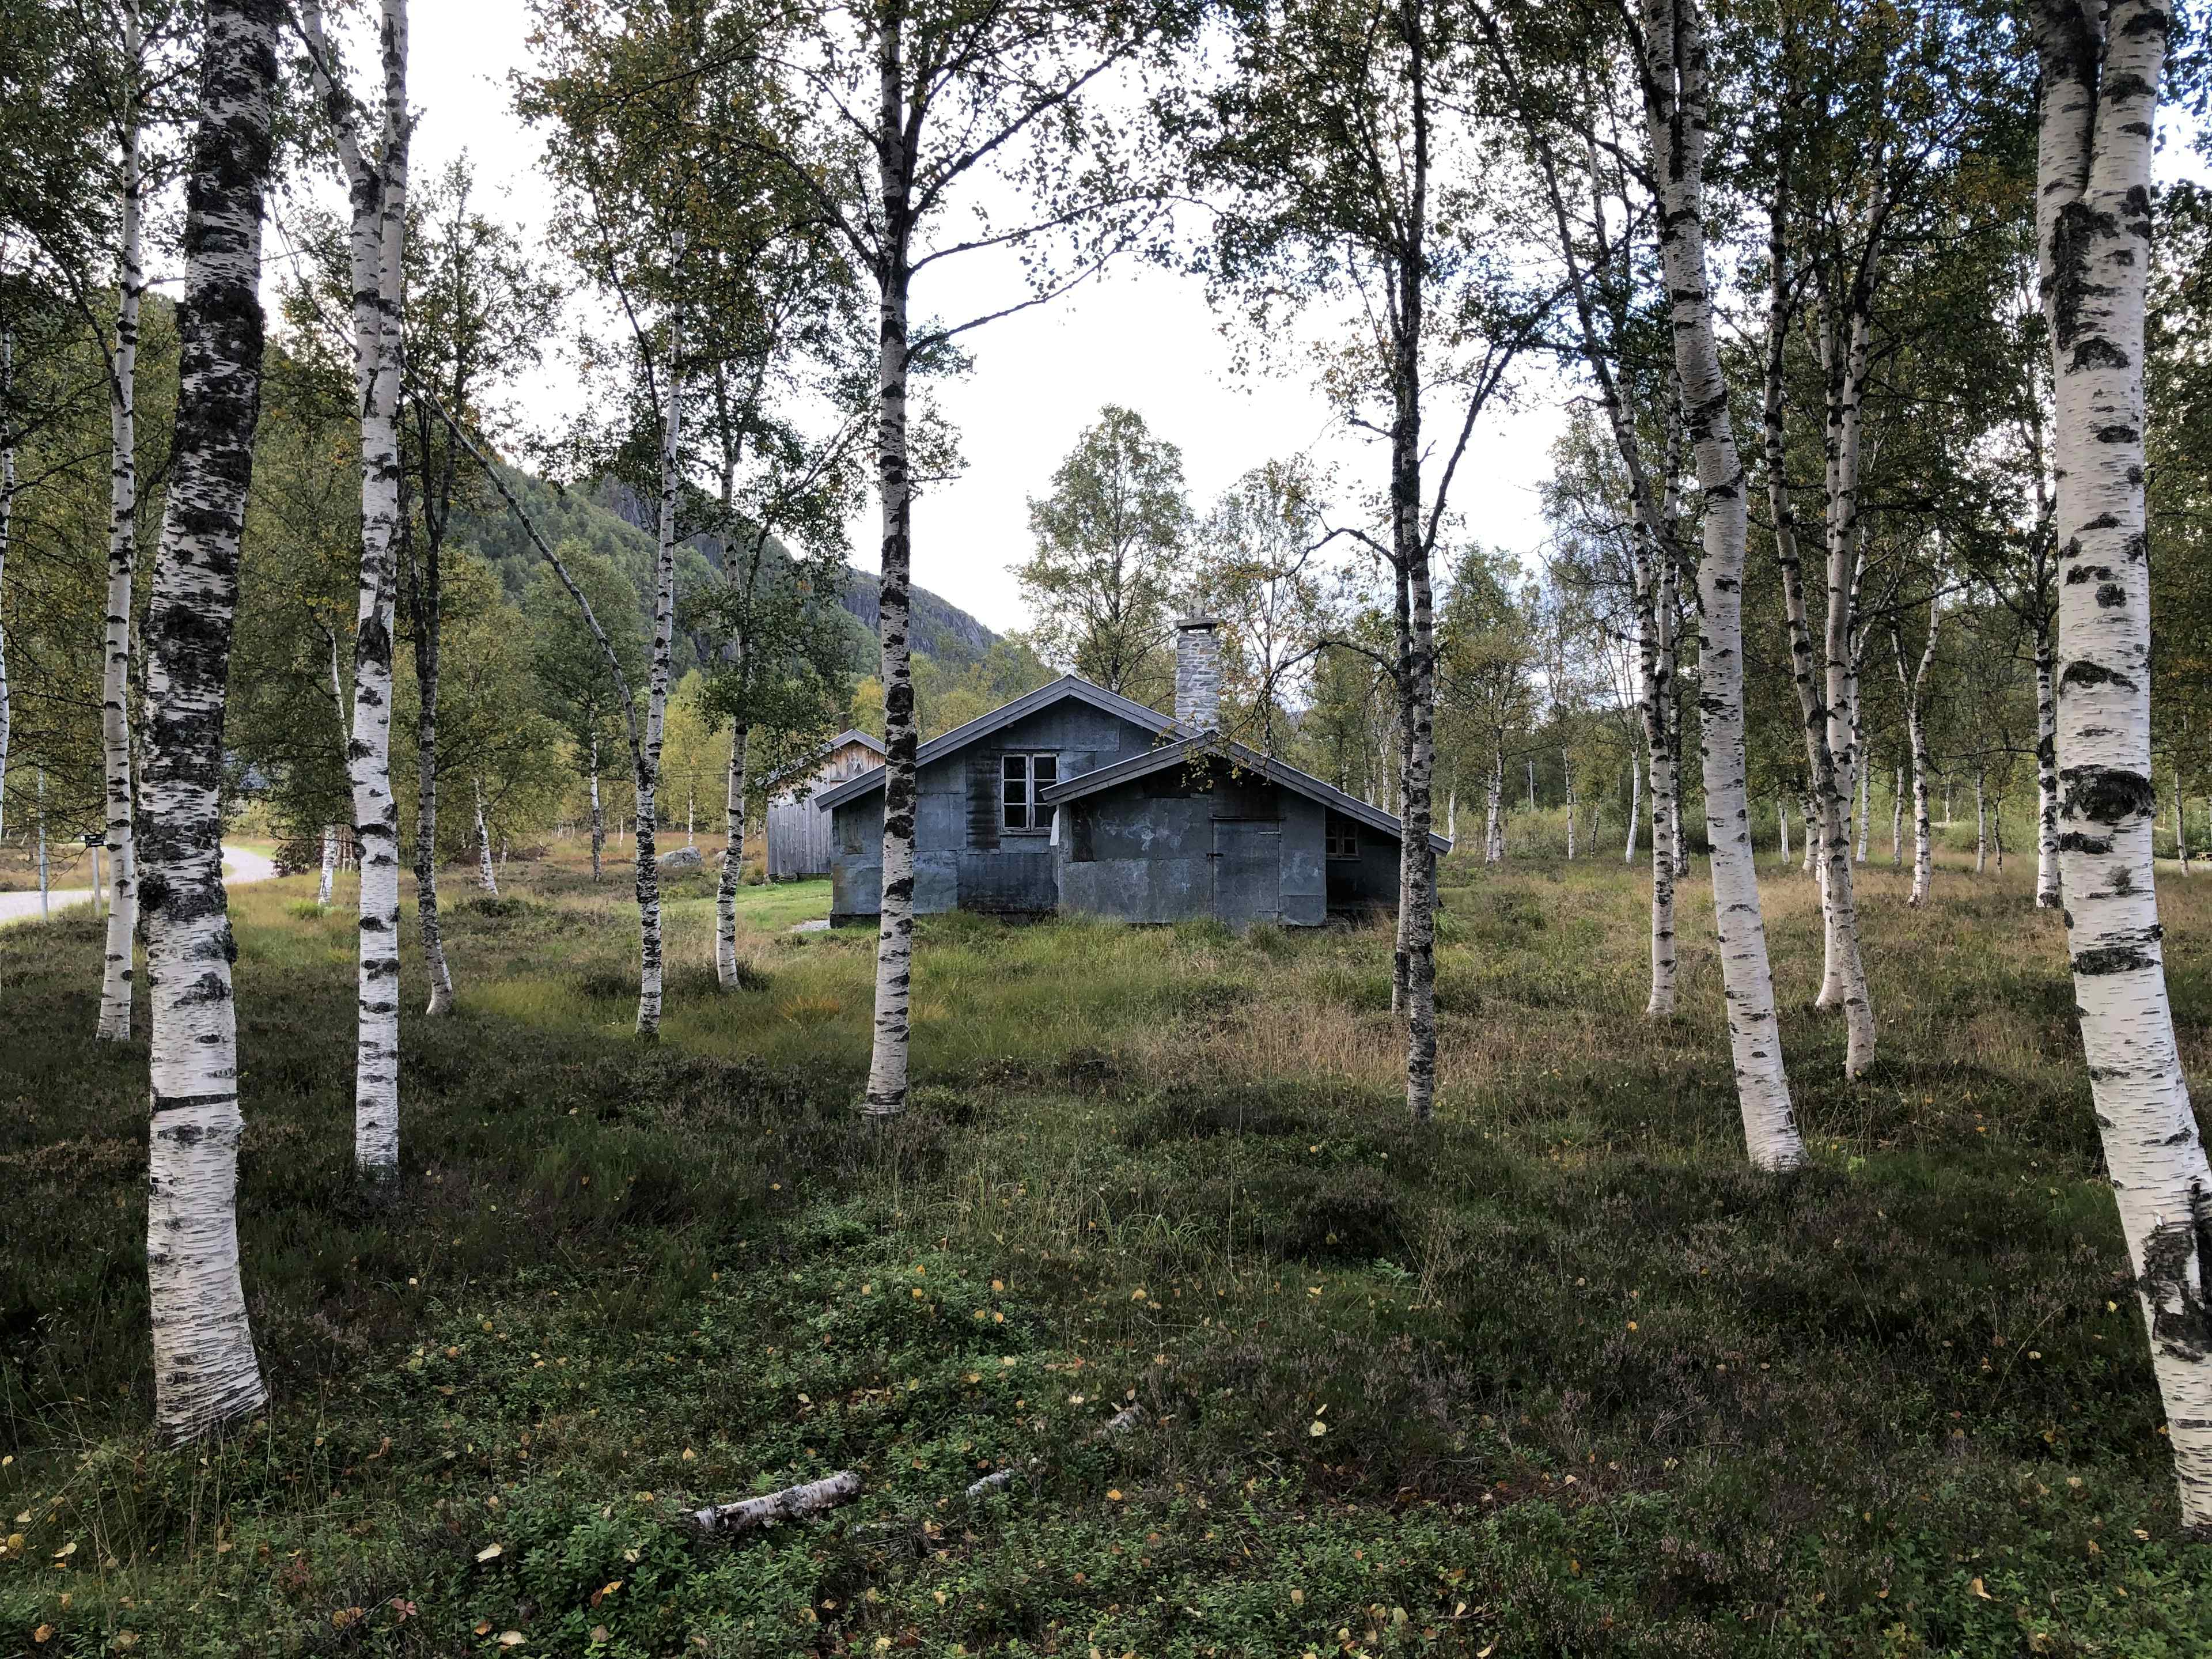 A cabin in a lush green forest of birch trees